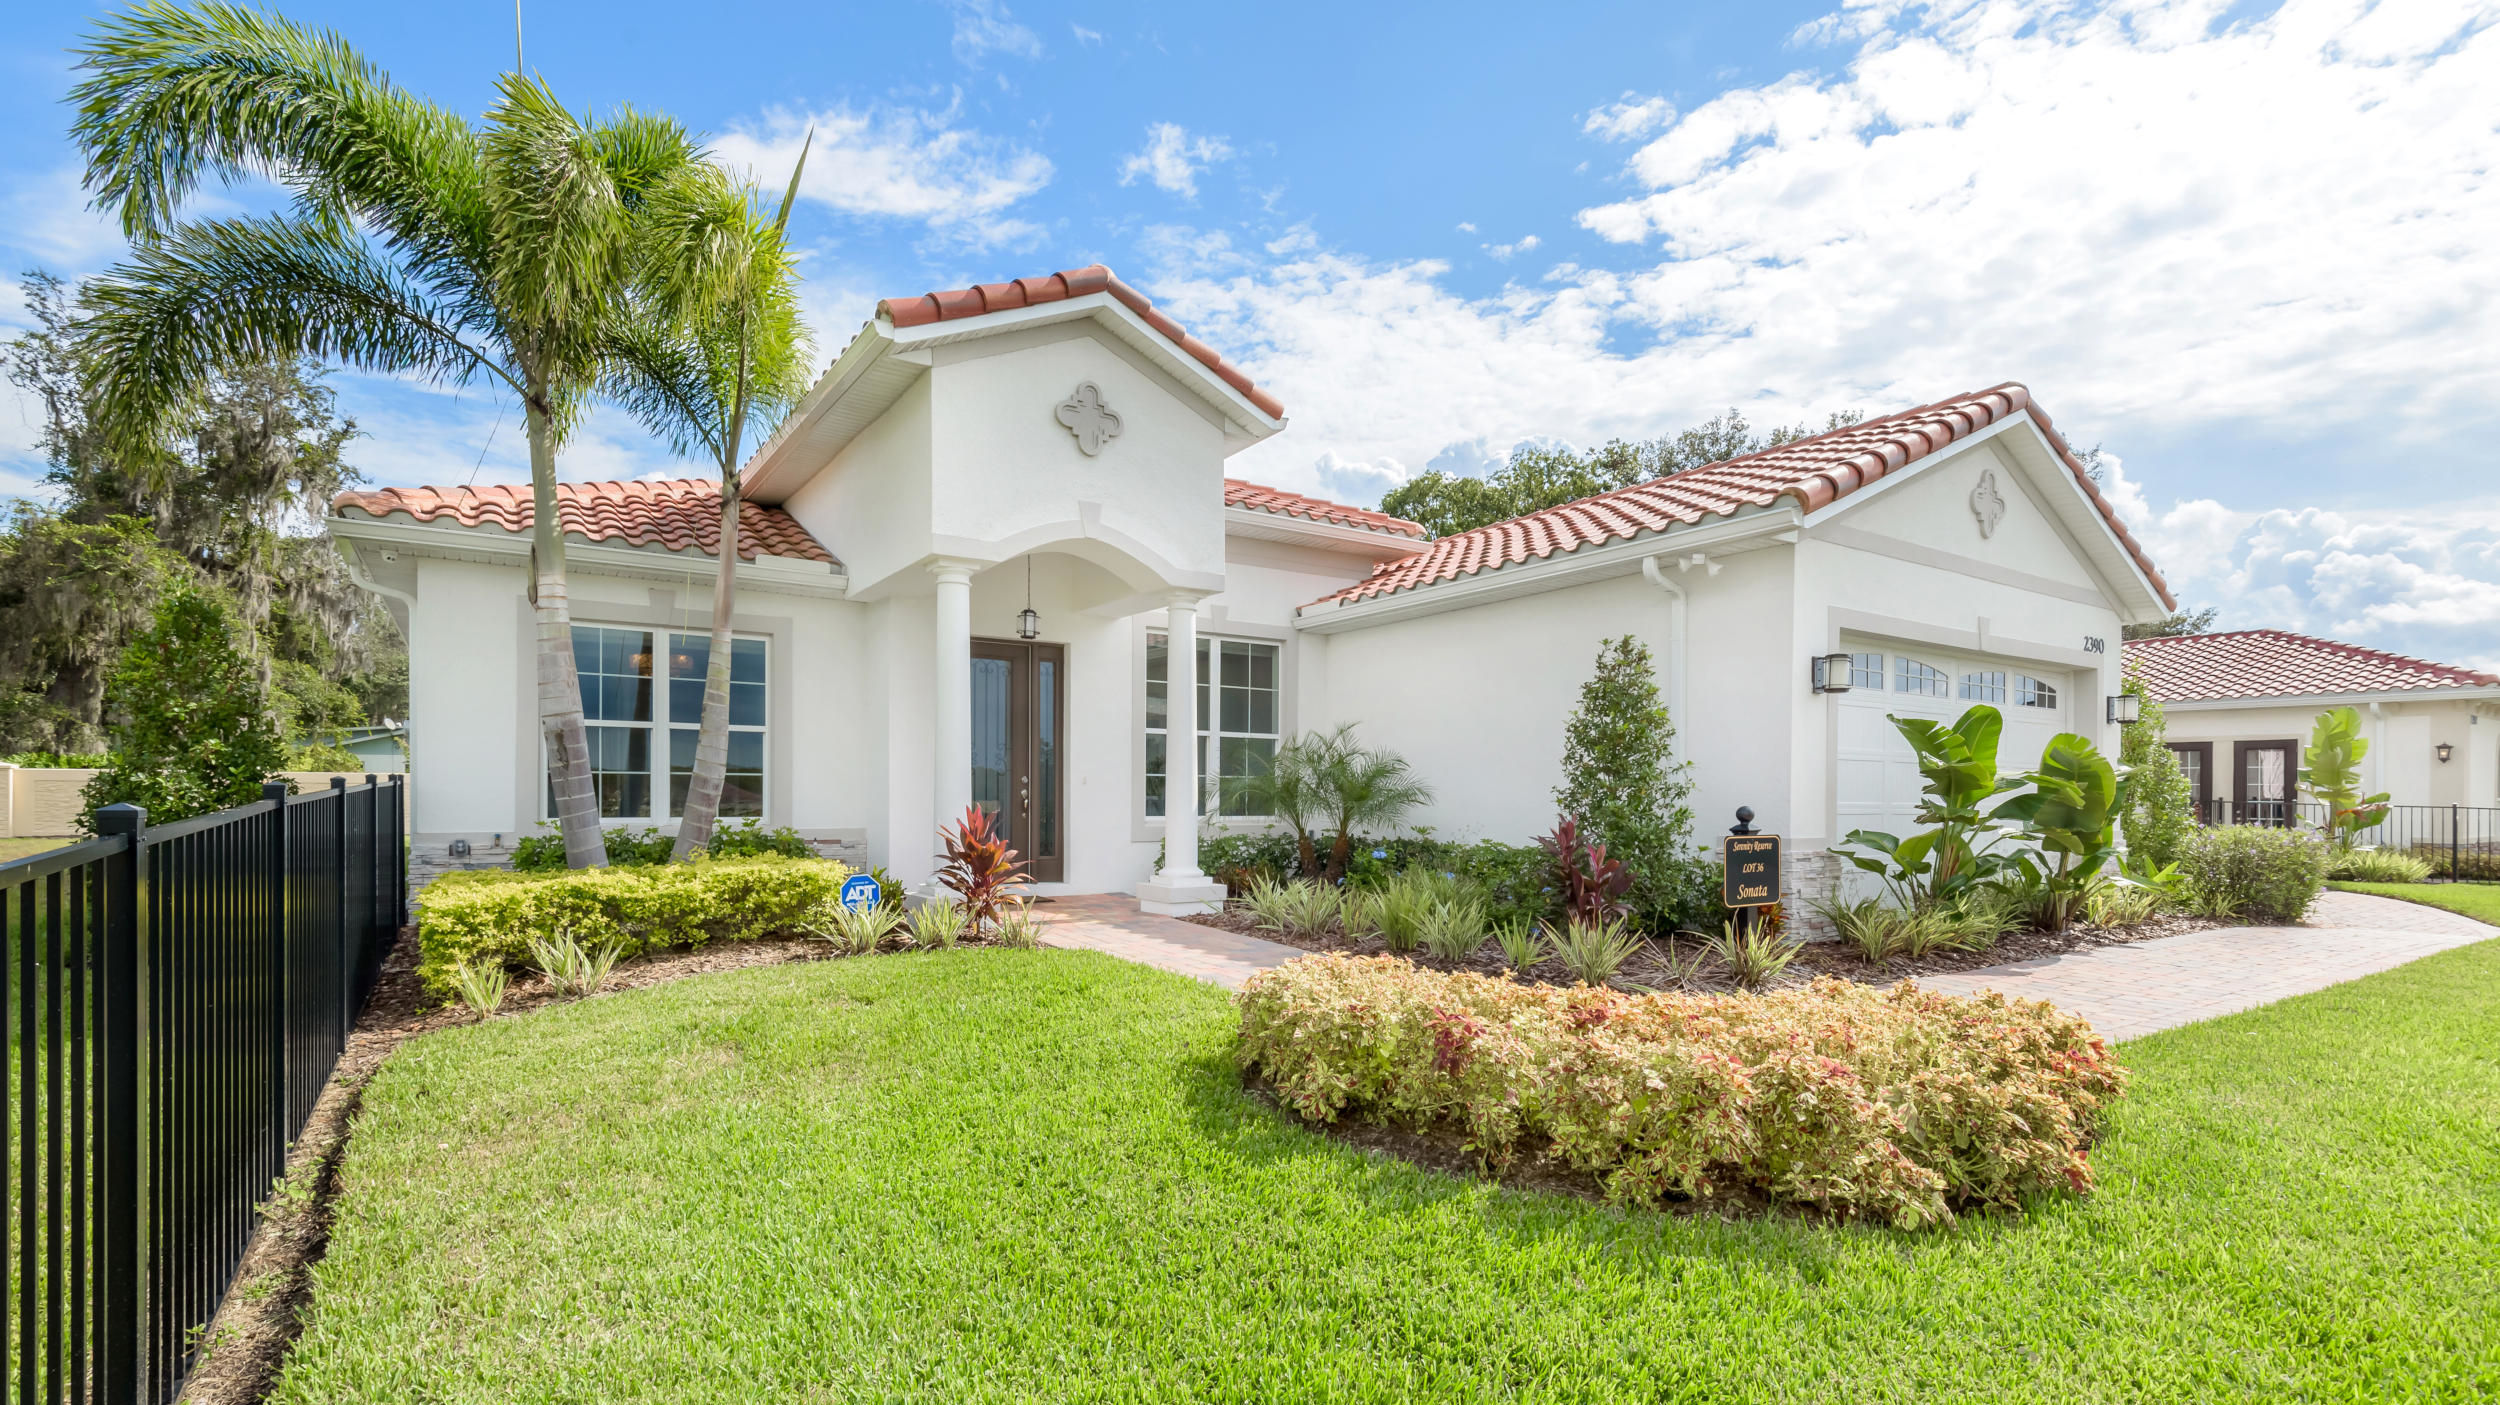 Best Real Estate Videography Orlando